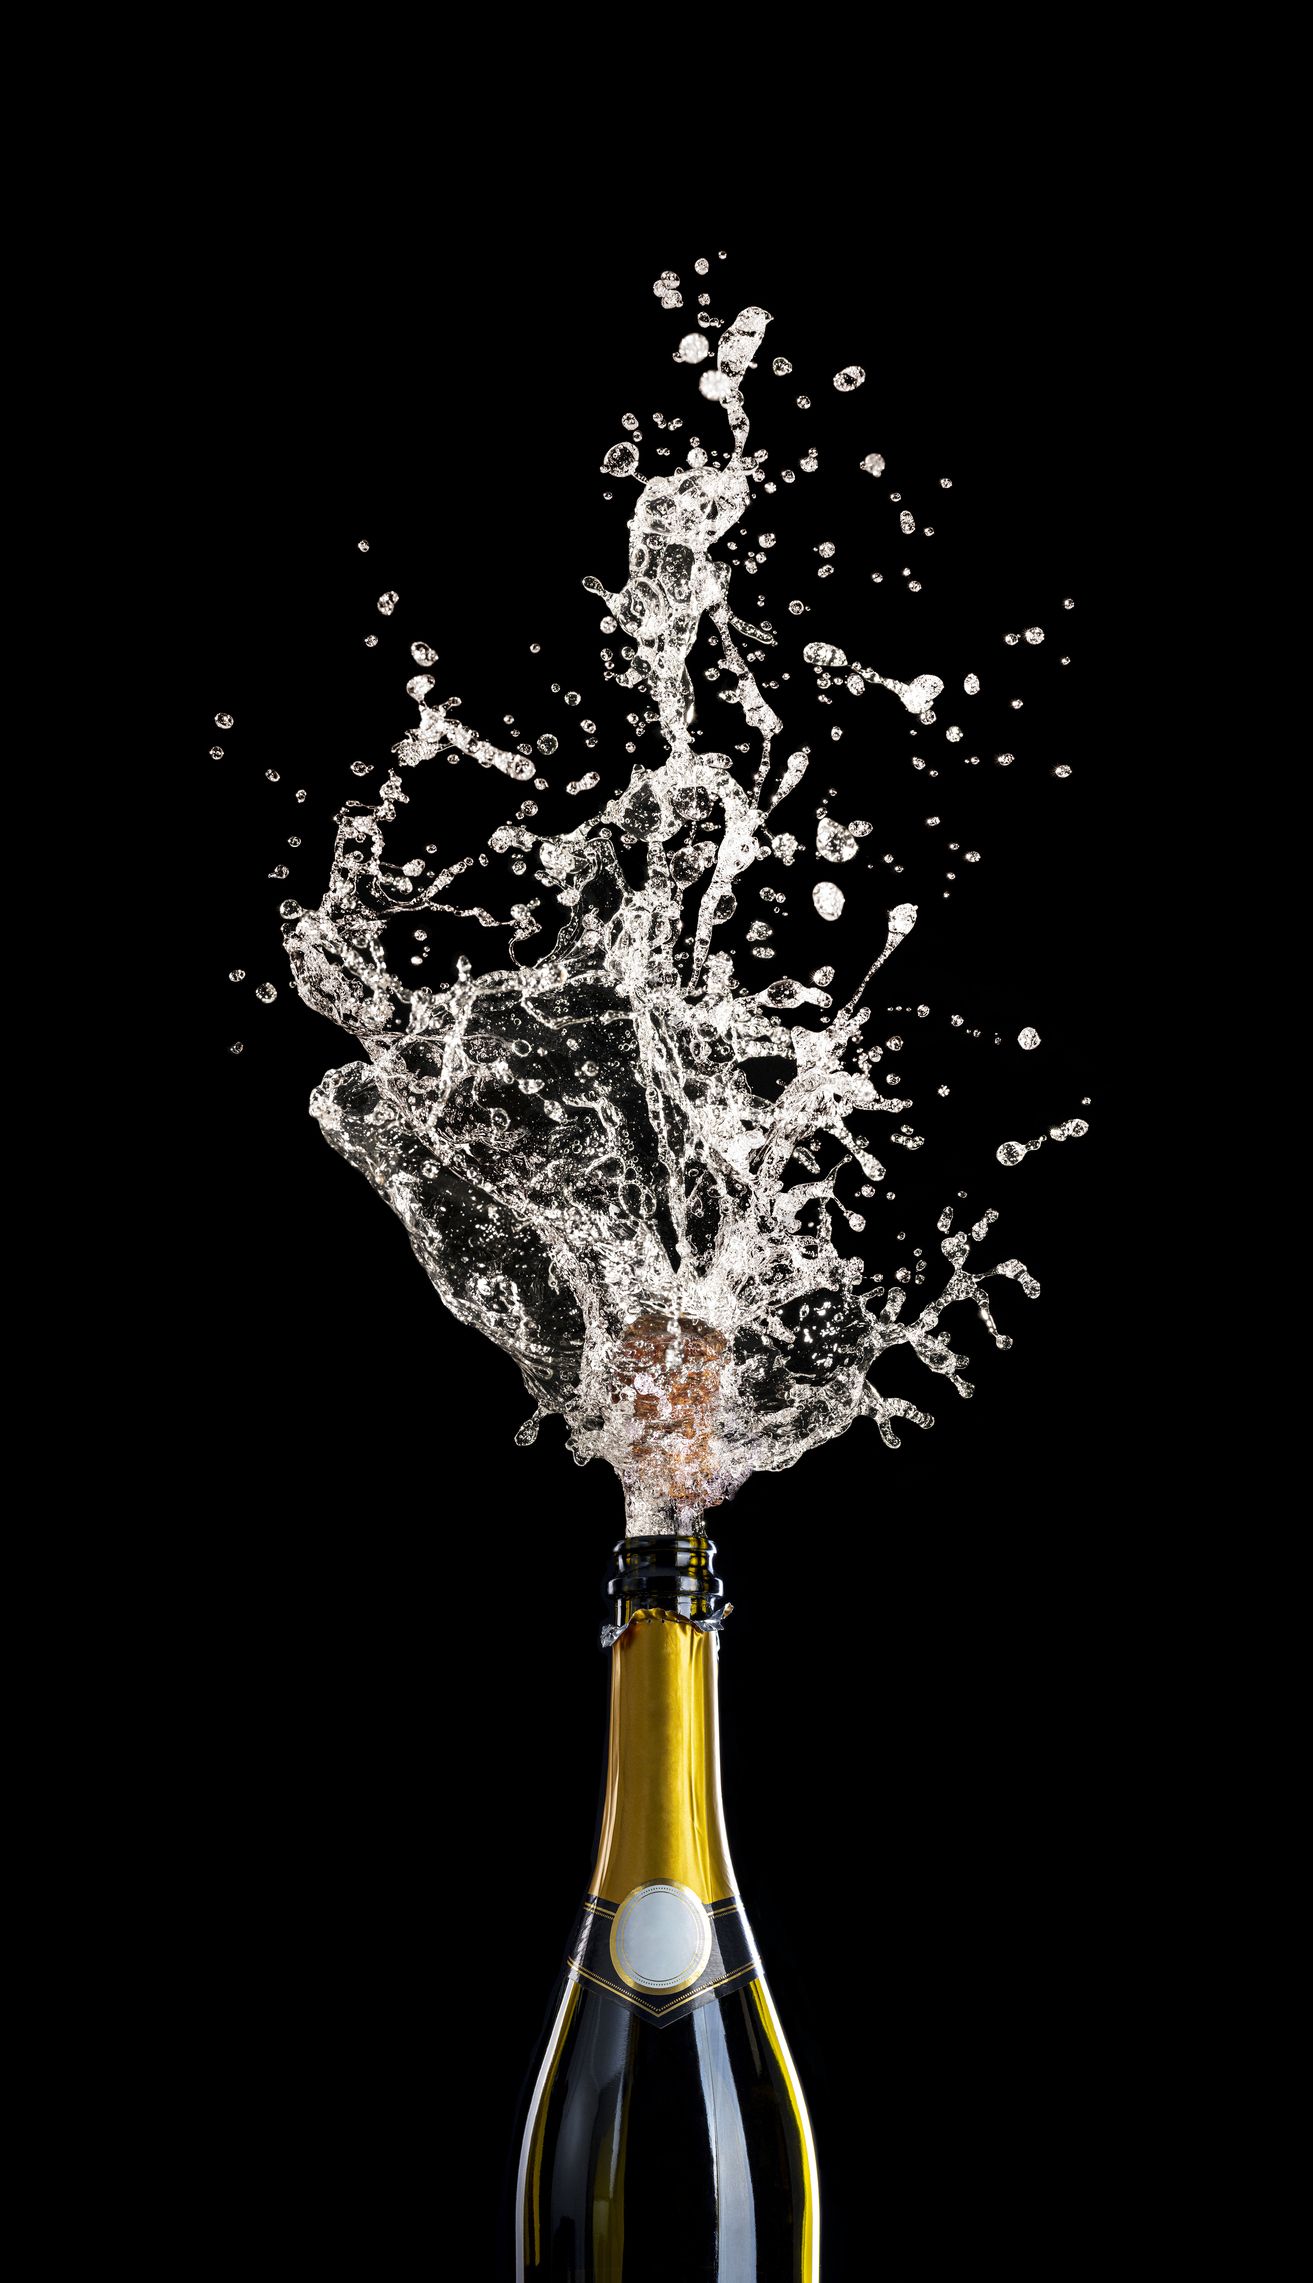 A Perfect Storm of Disruptions Will Create a Global Champagne Shortage